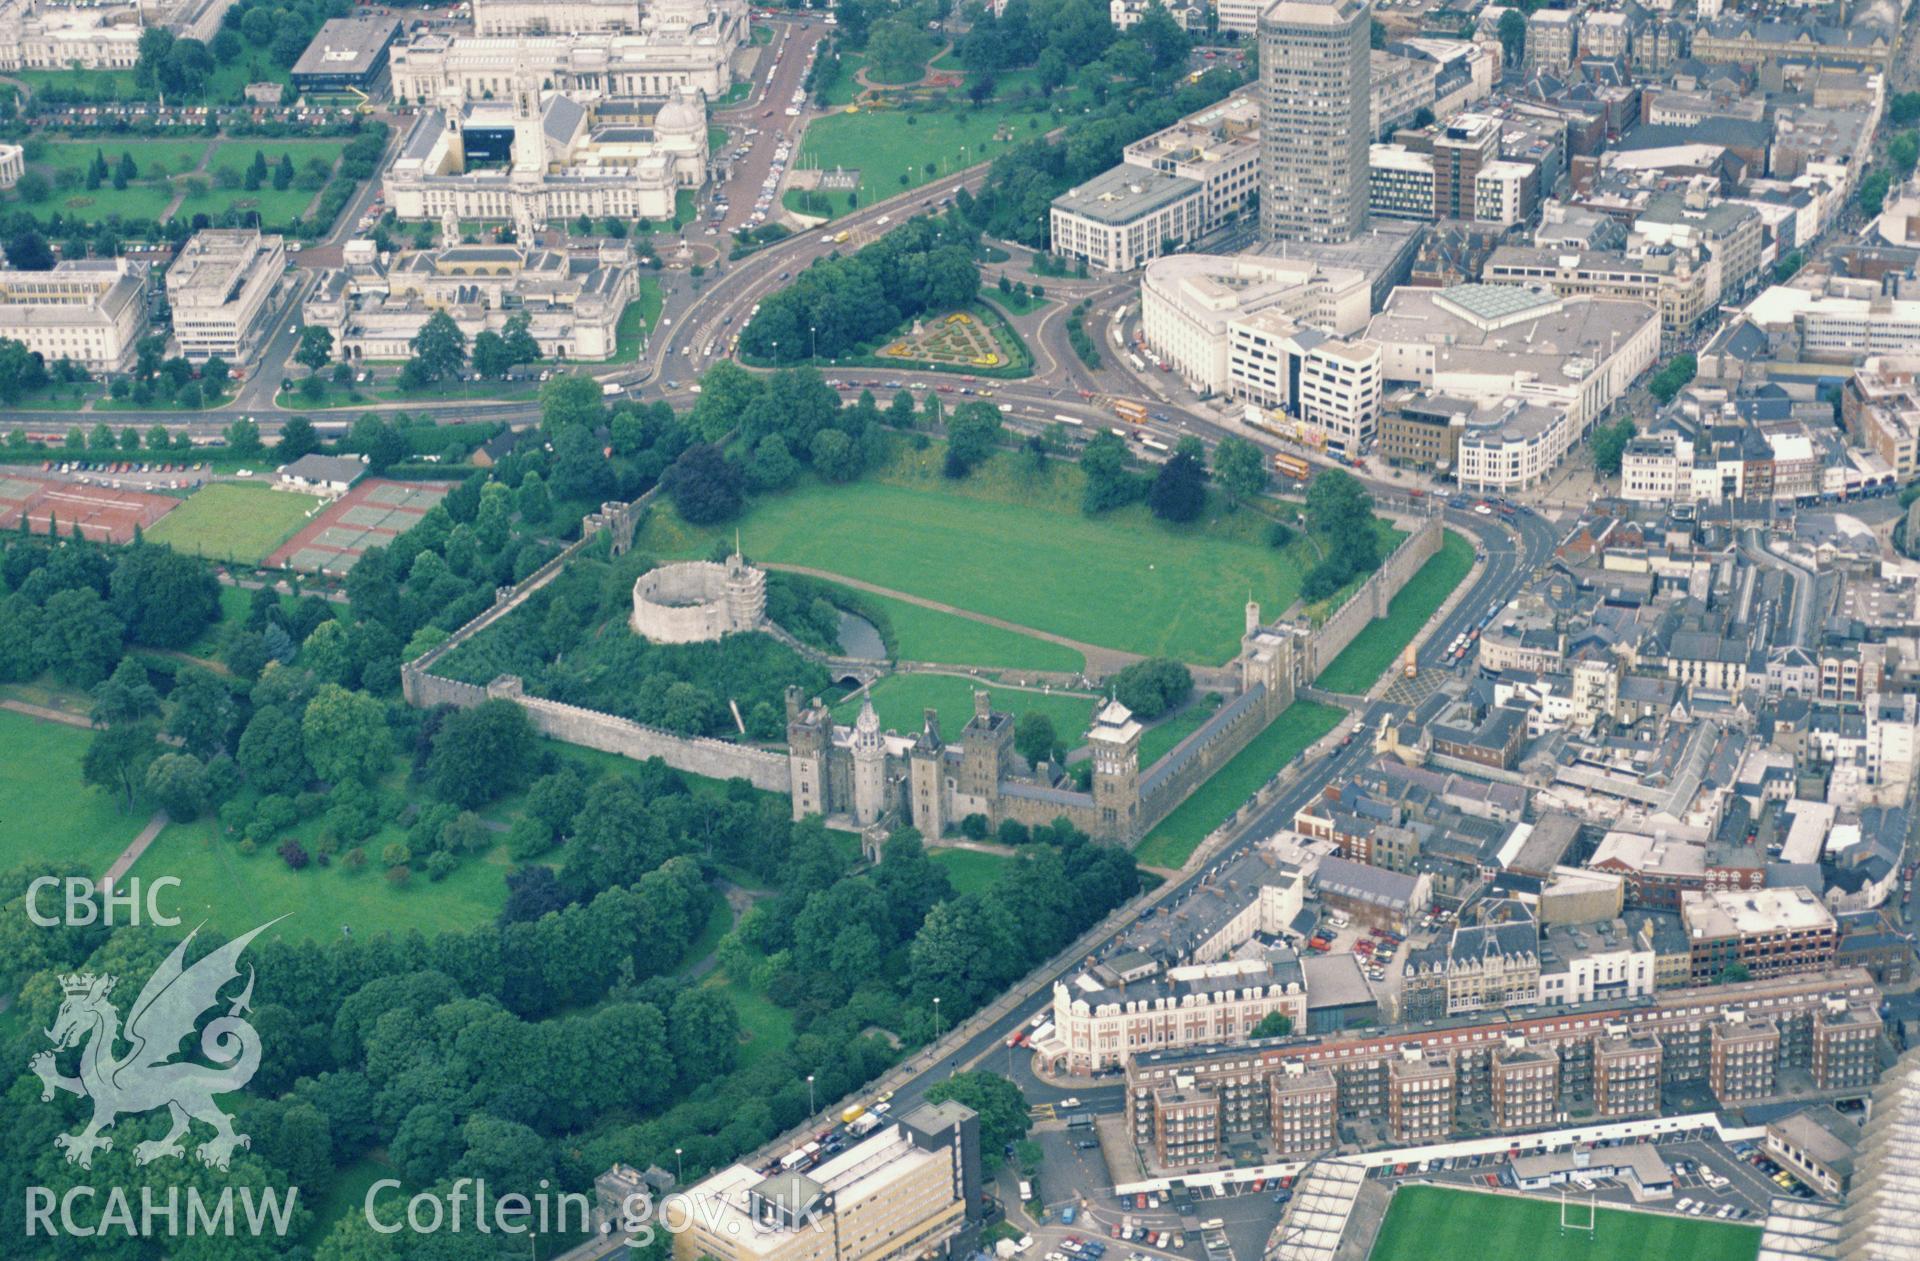 Slide of RCAHMW colour oblique aerial photograph of Cardiff Castle Roman Fort, taken by C.R. Musson, 3/7/1988.